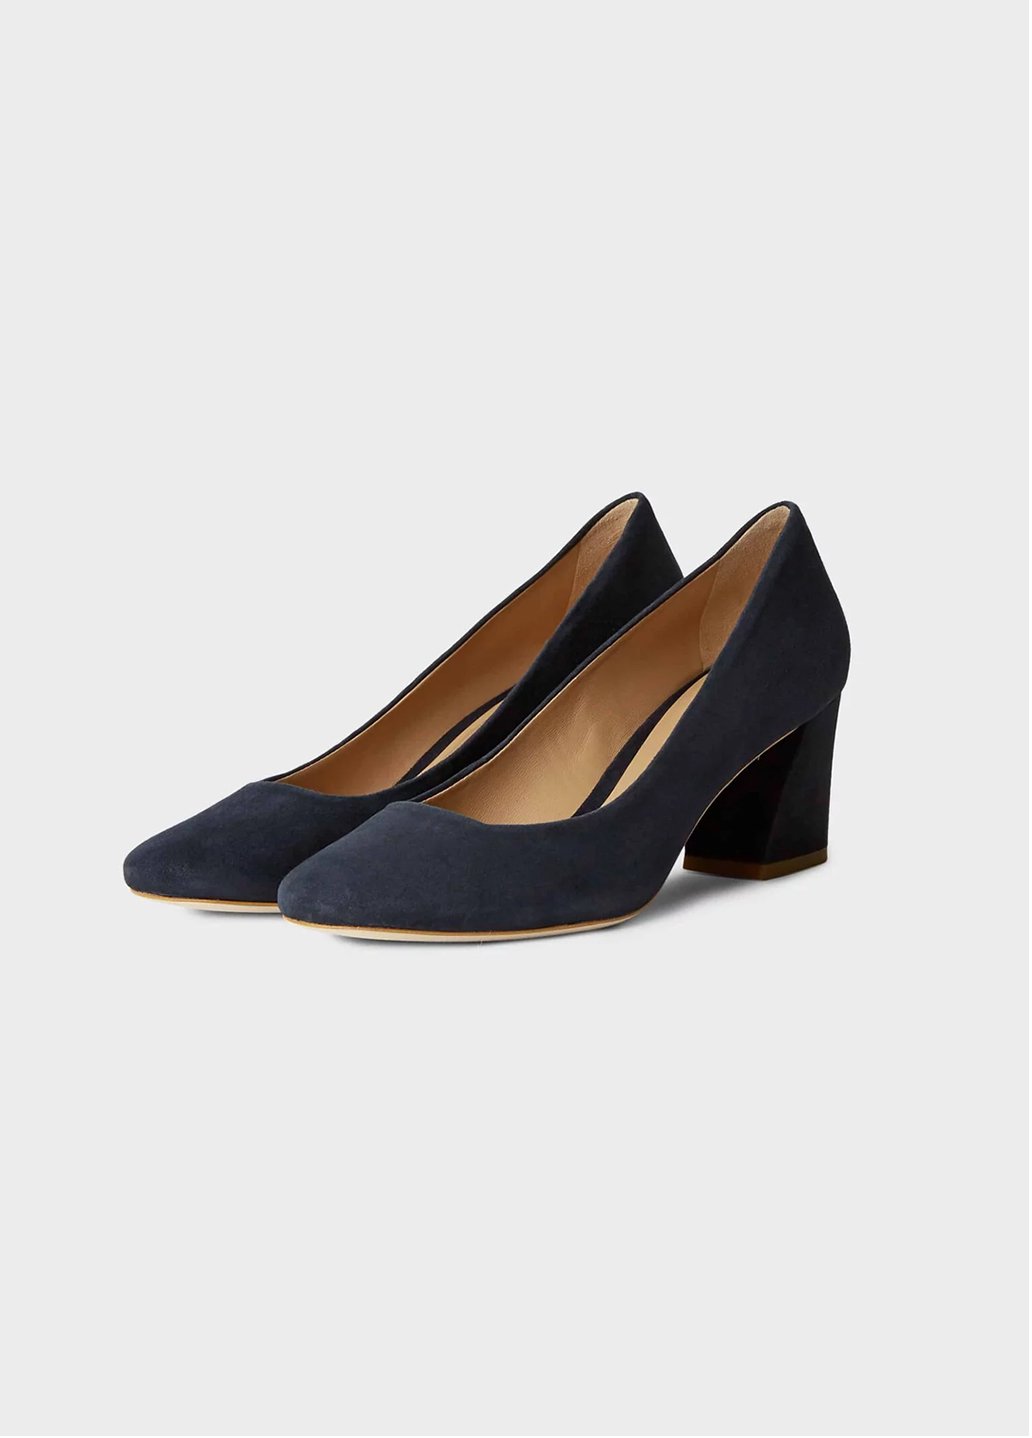 Hobbs classic black court shoe. Wear your block heel court shoes to work or to the races.